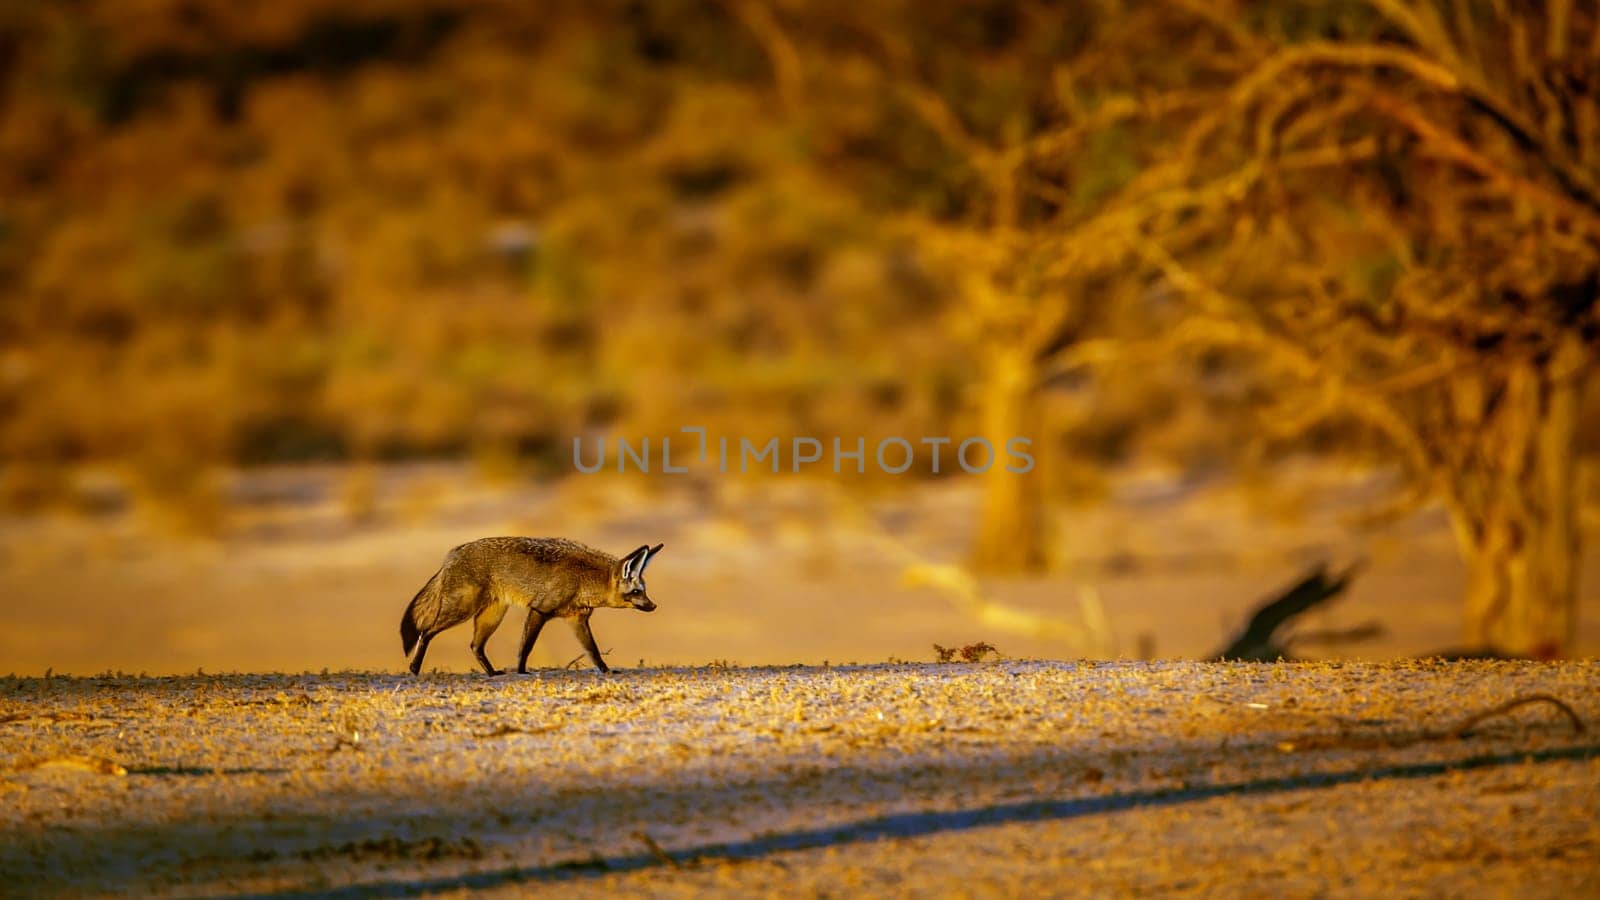 Bat-eared fox walking at dusk in dry land in Kgalagadi transfrontier park, South Africa; specie Otocyon megalotis family of Canidae 